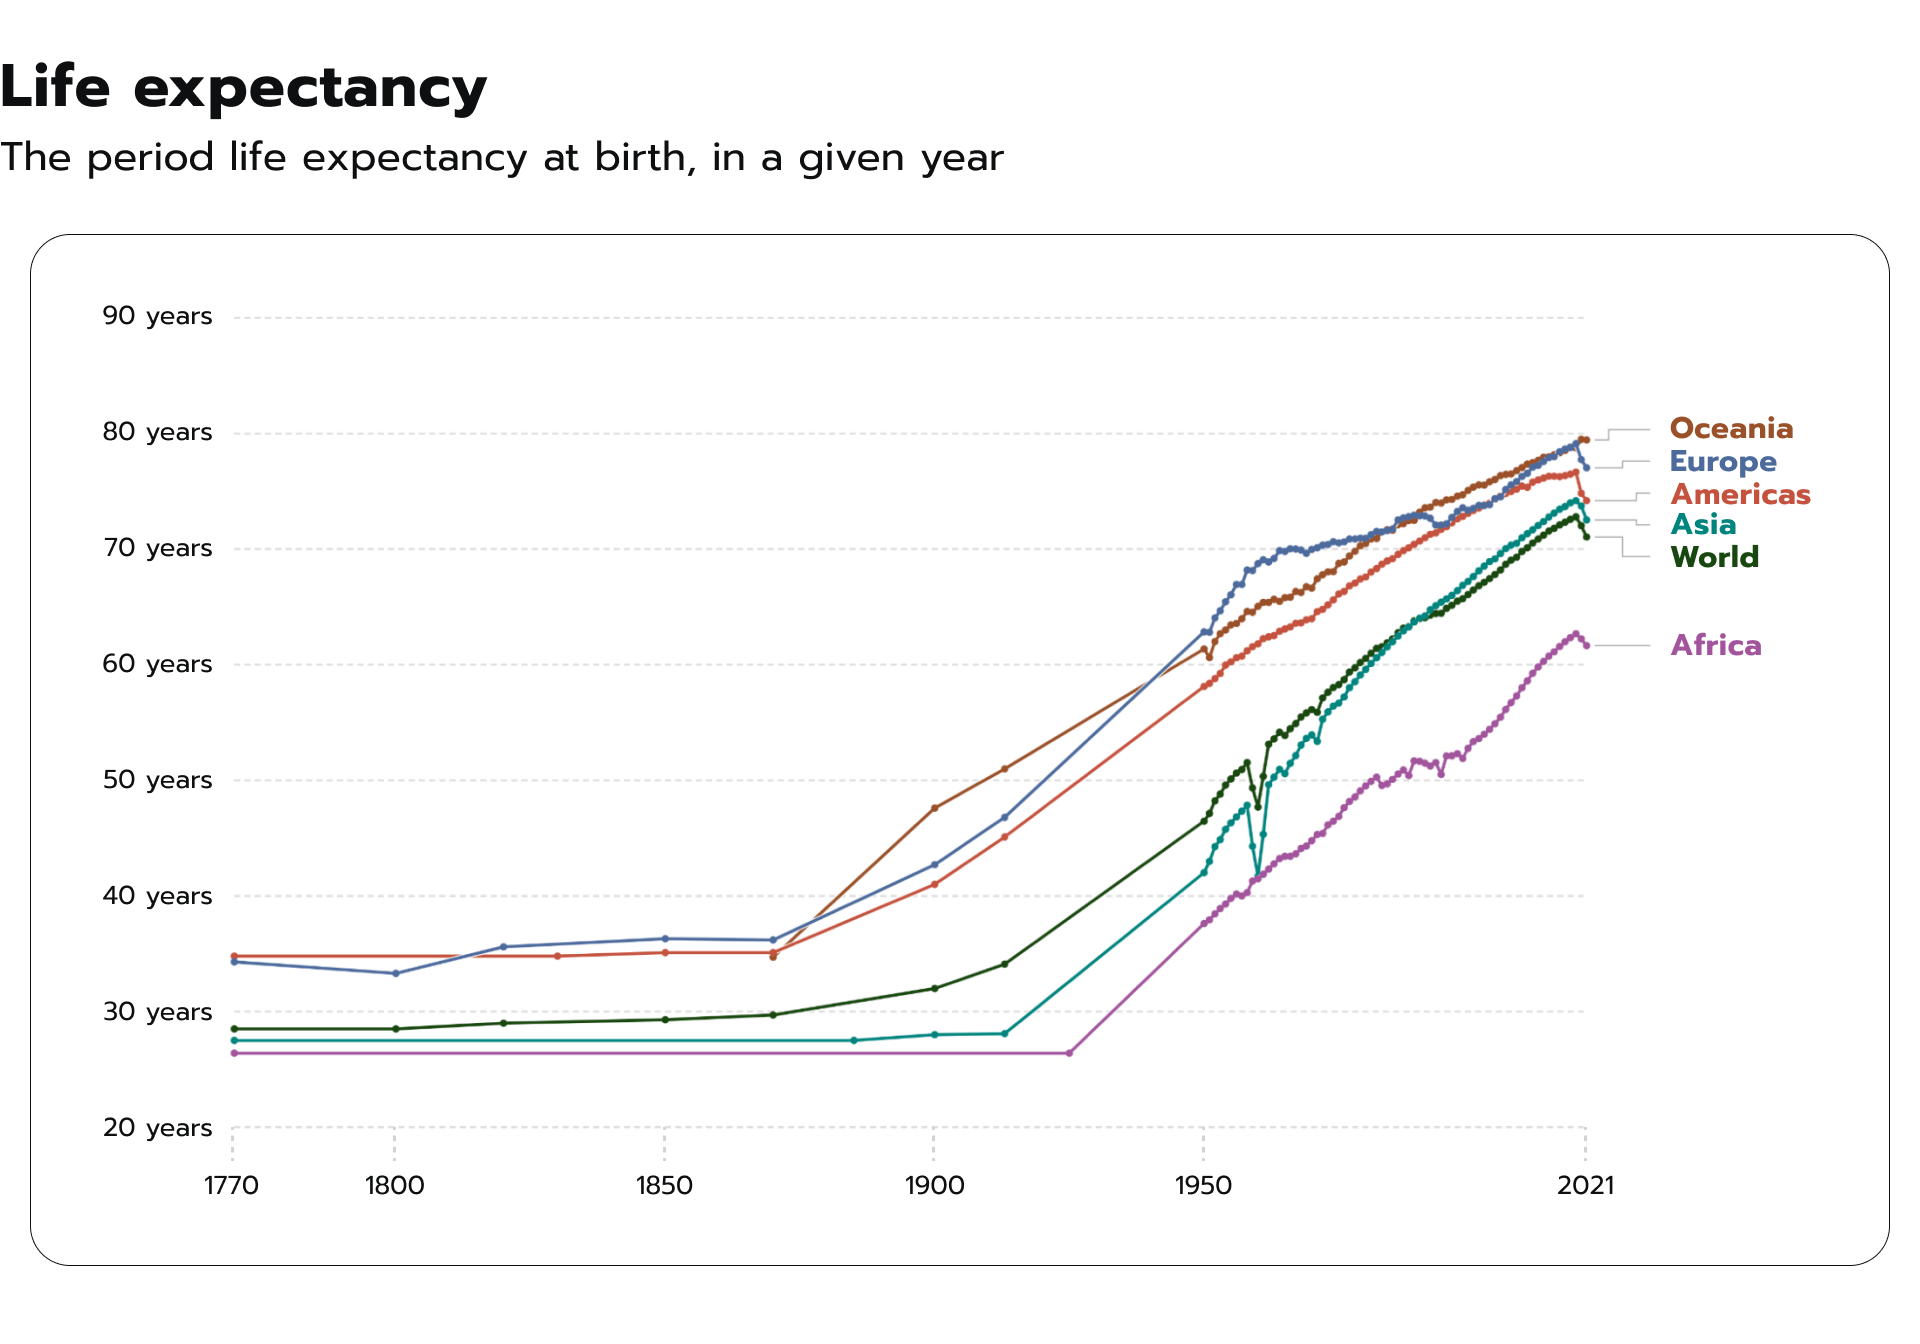 The fluctuations in life expectancy